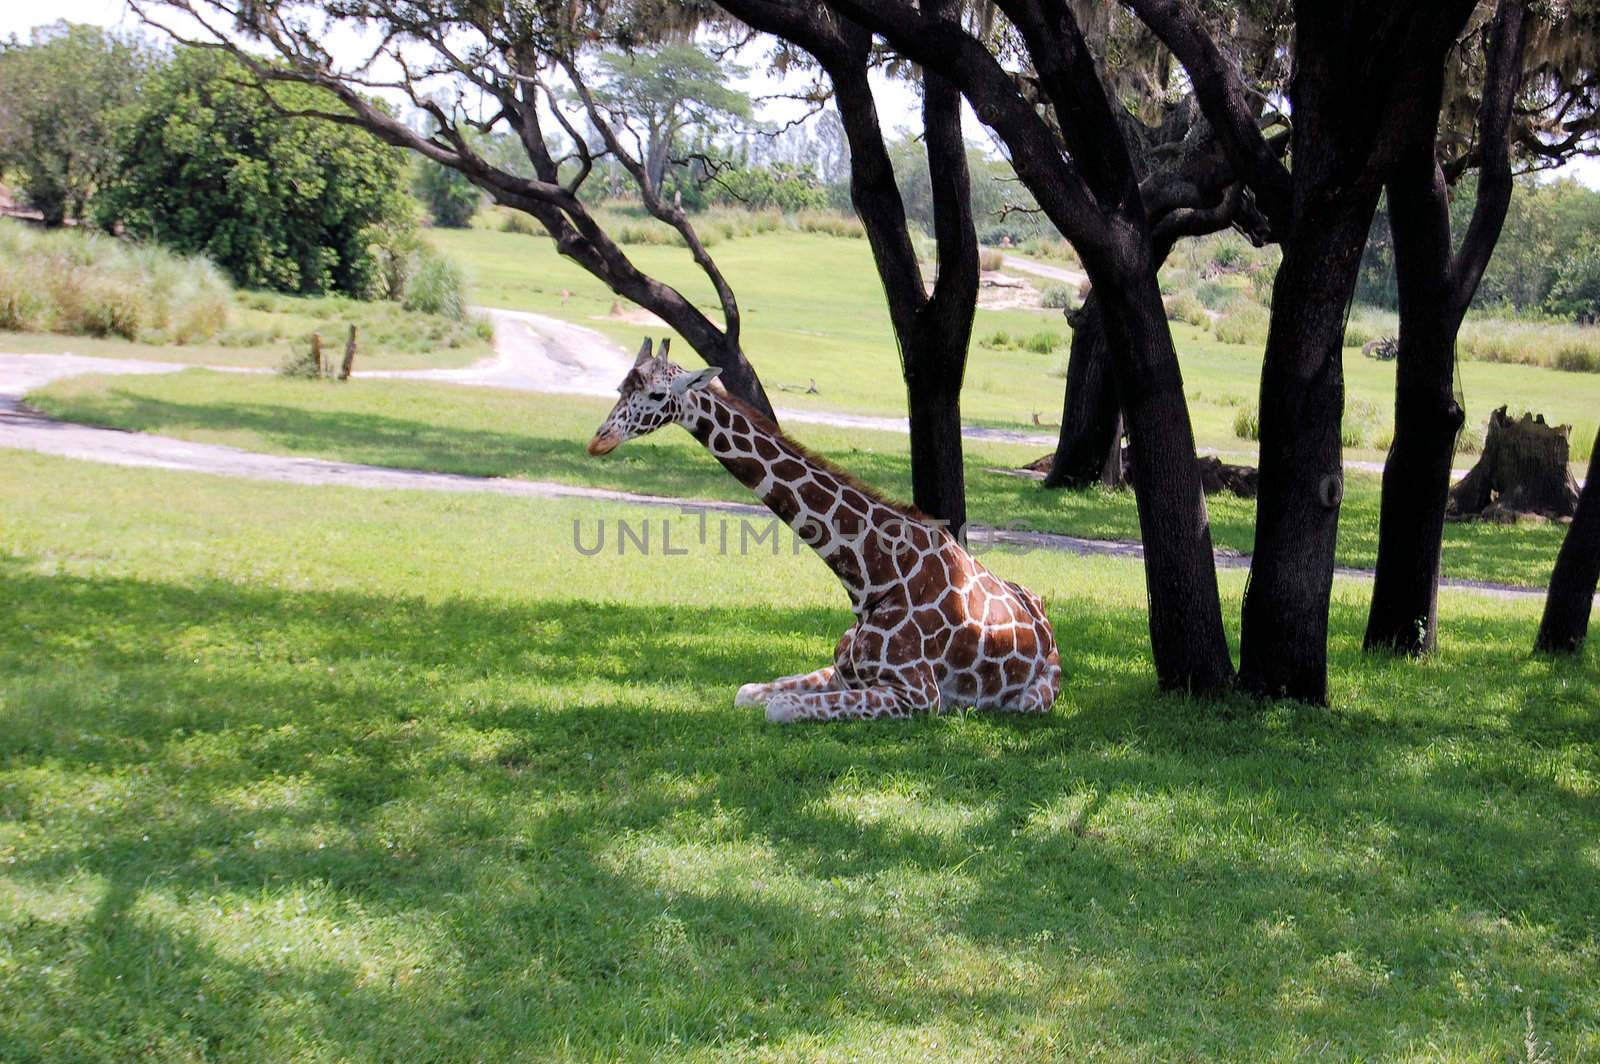 Giraffe Rests In The Shade by RefocusPhoto